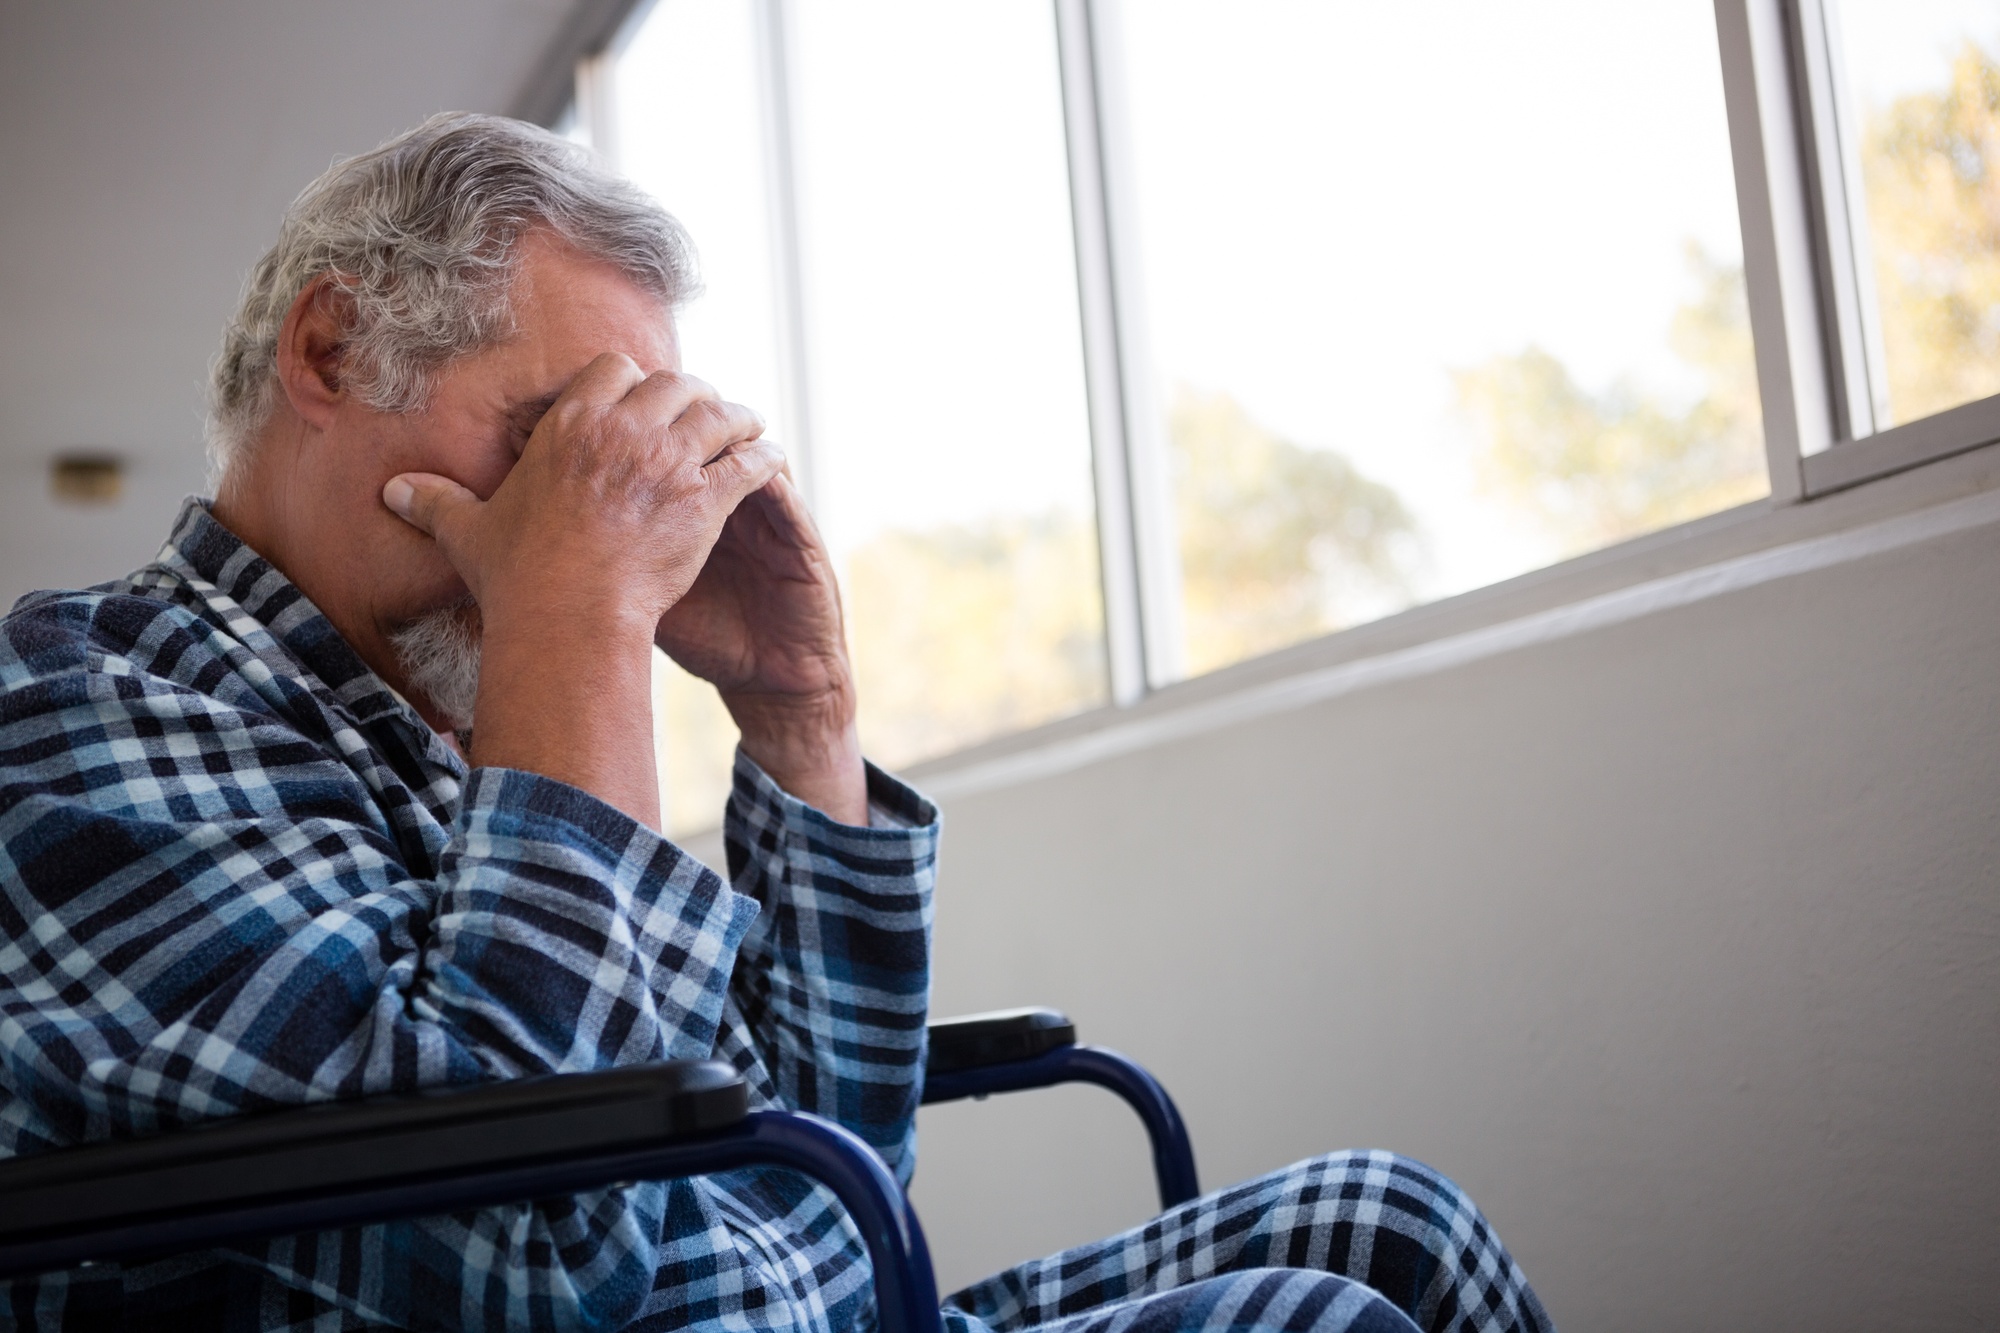 You should expect nursing homes to care for your elderly loved ones at all times. Here's when you should call a lawyer for nursing home abuse.